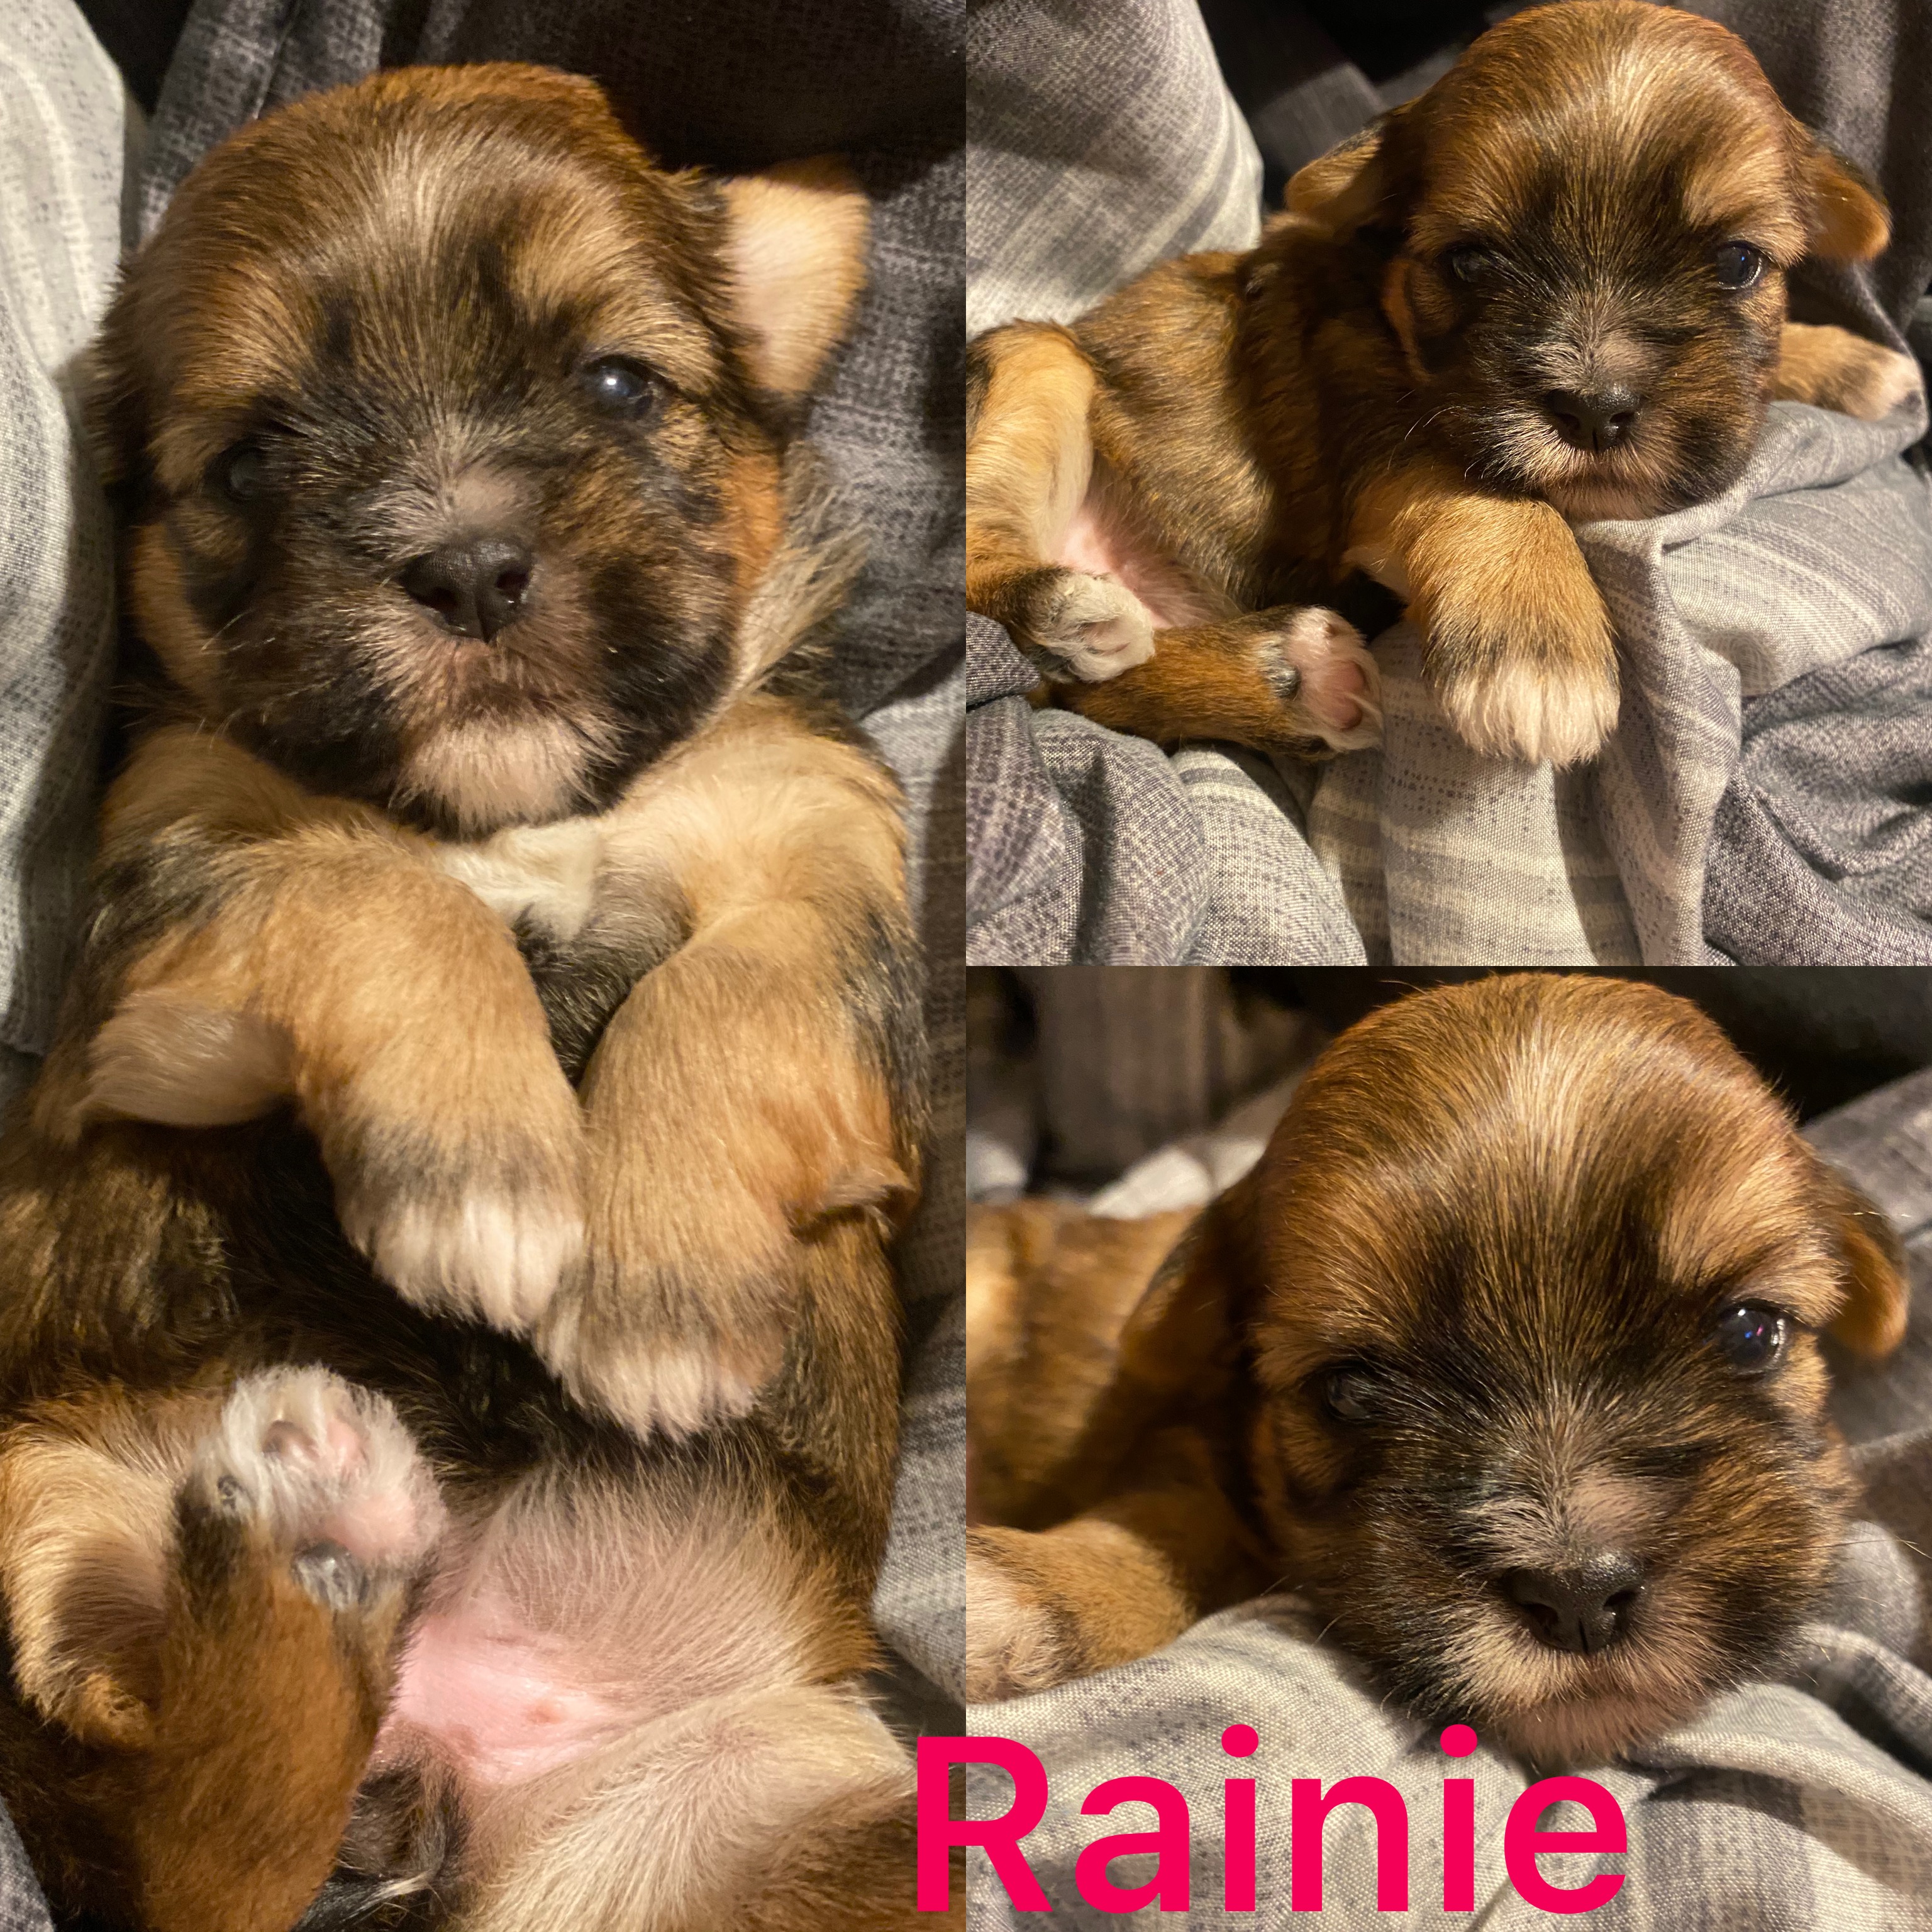 Rainie is ADOPTED not available